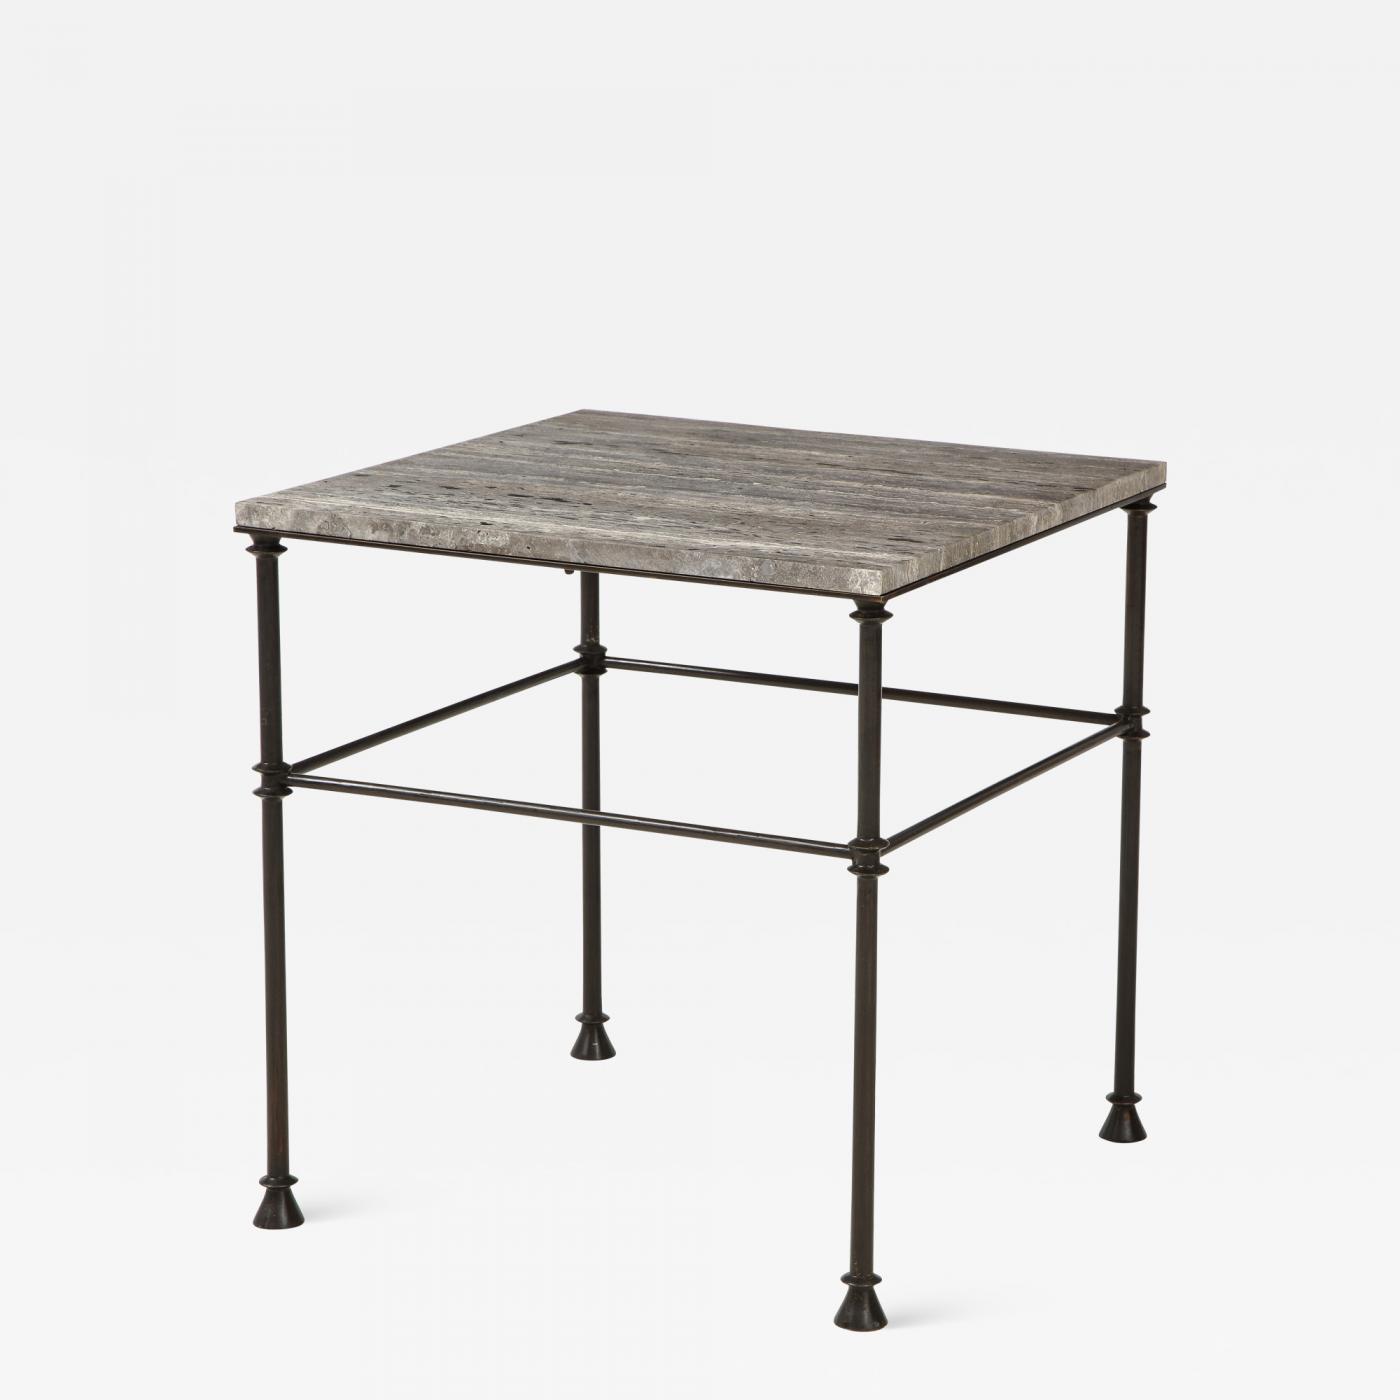 A pair of custom made tables, bronze legs and 